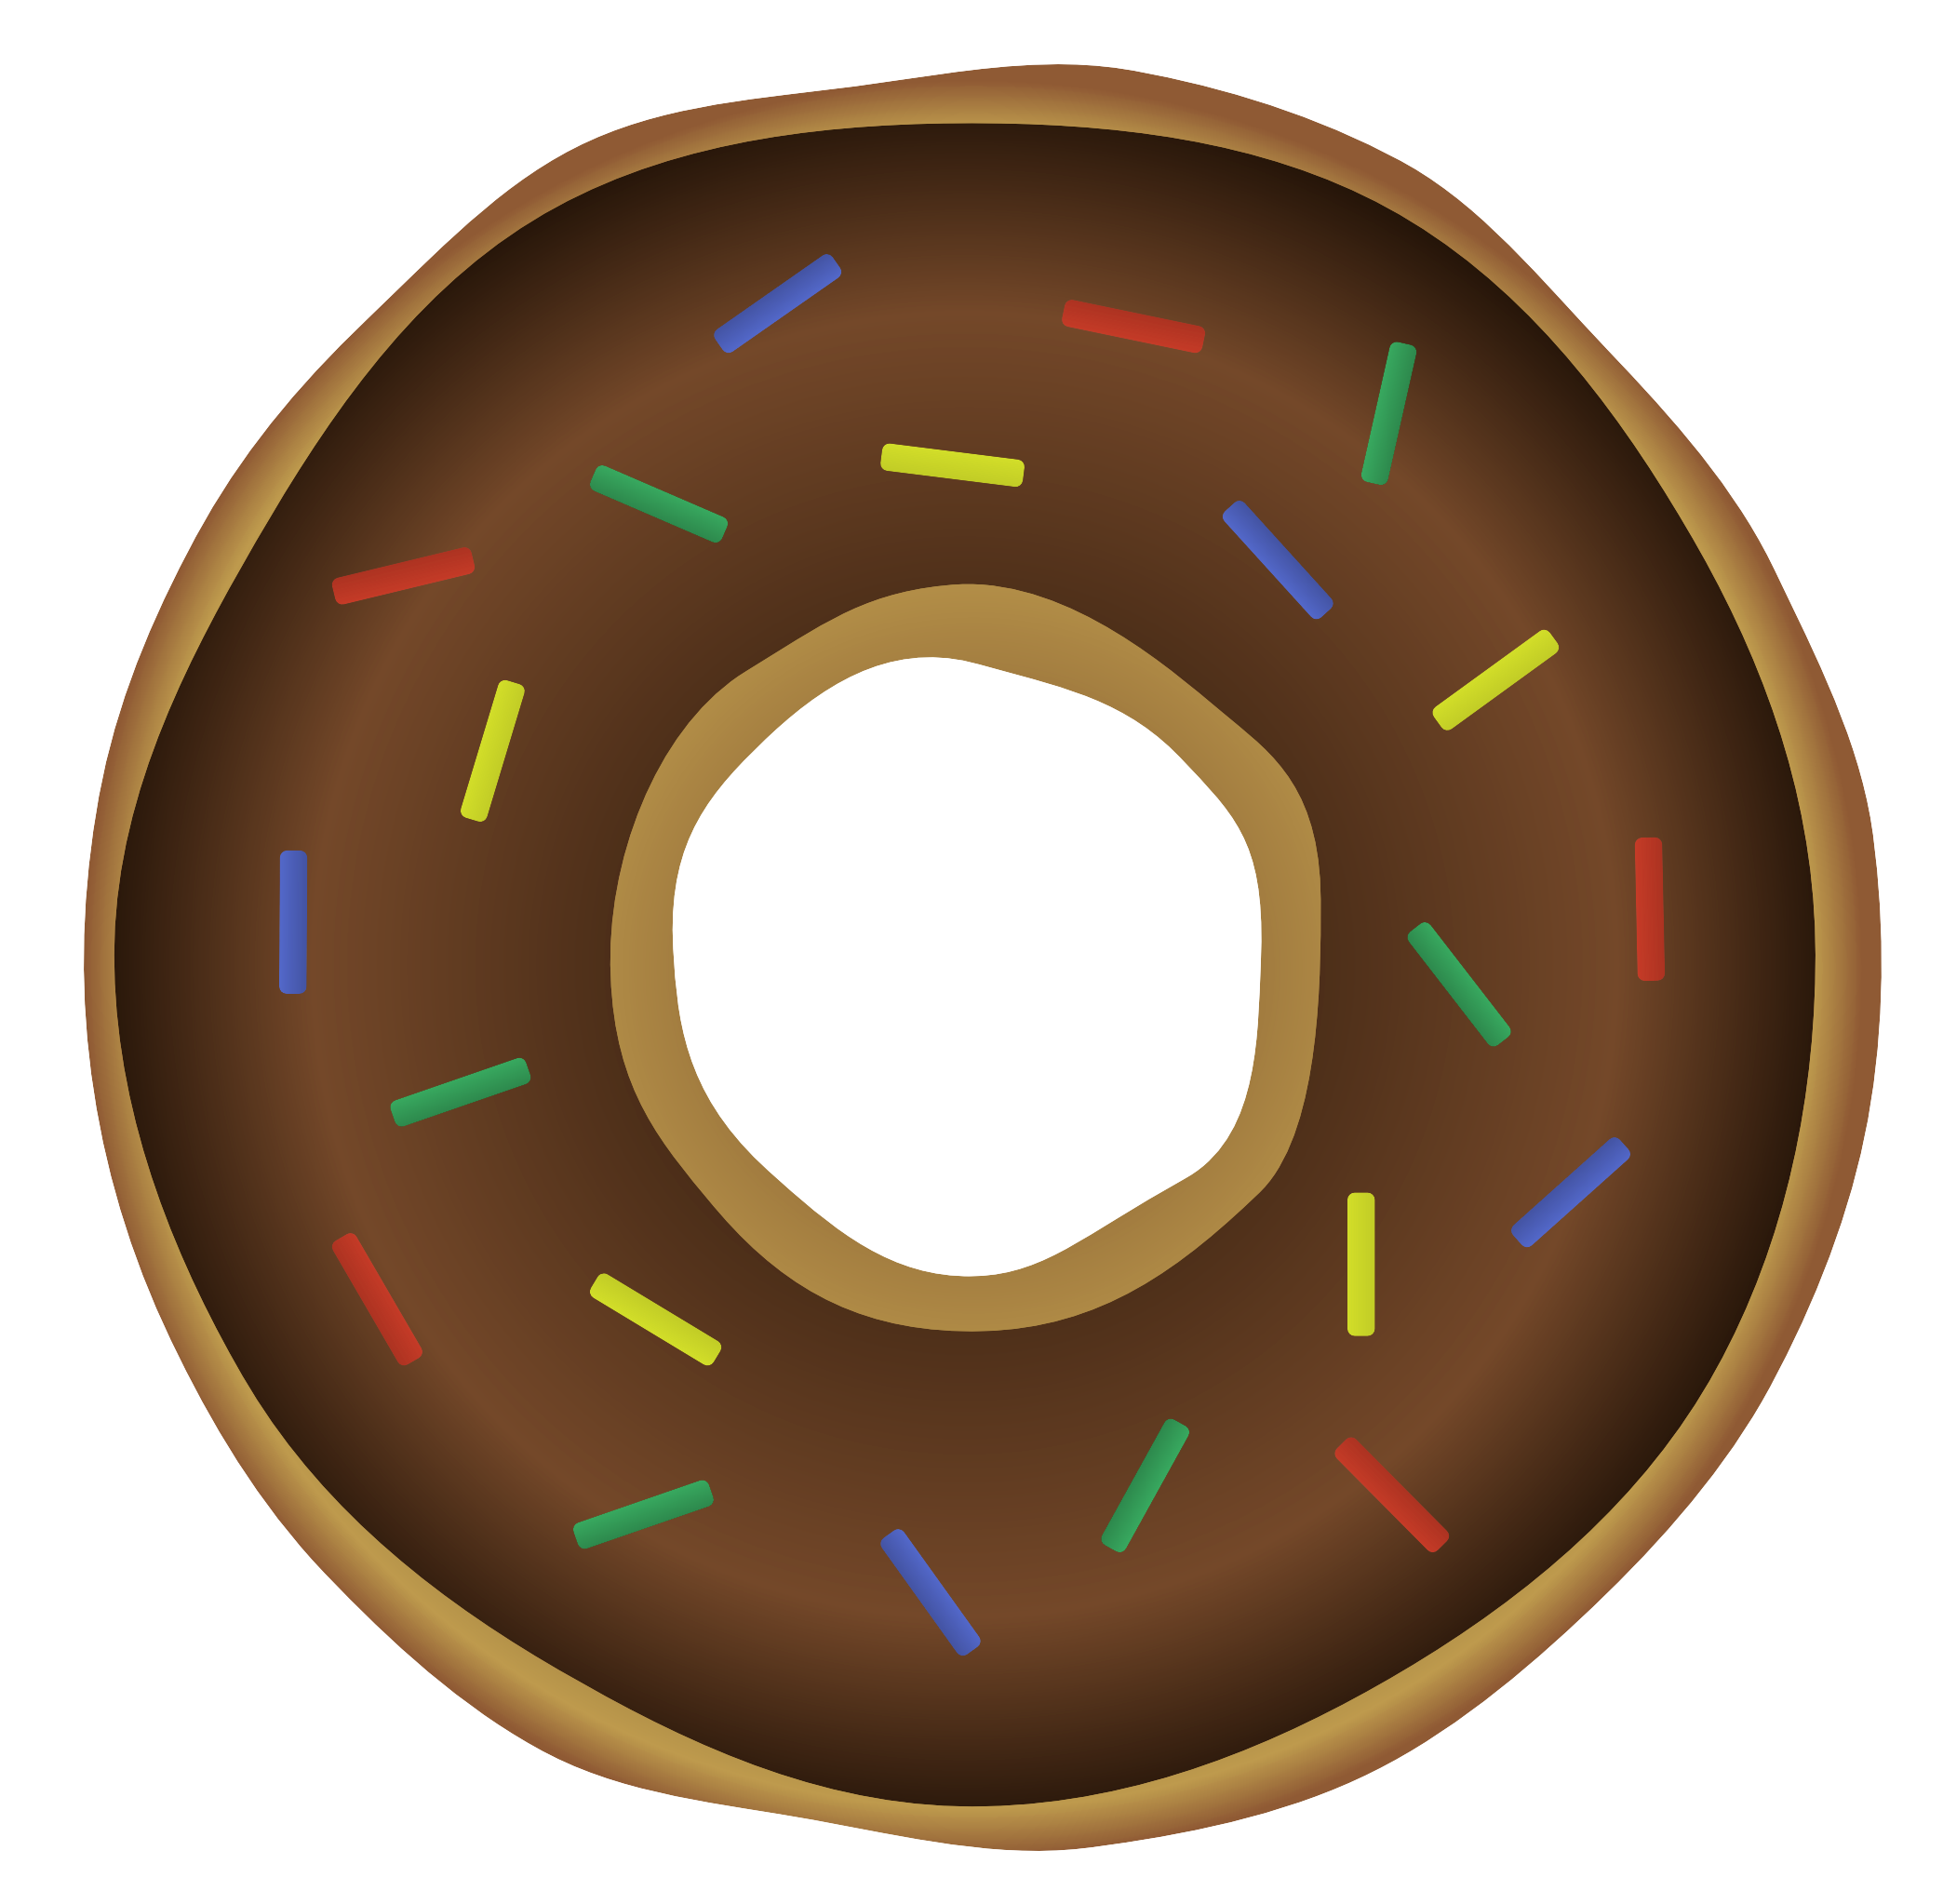 A Donut With Sprinkles On It